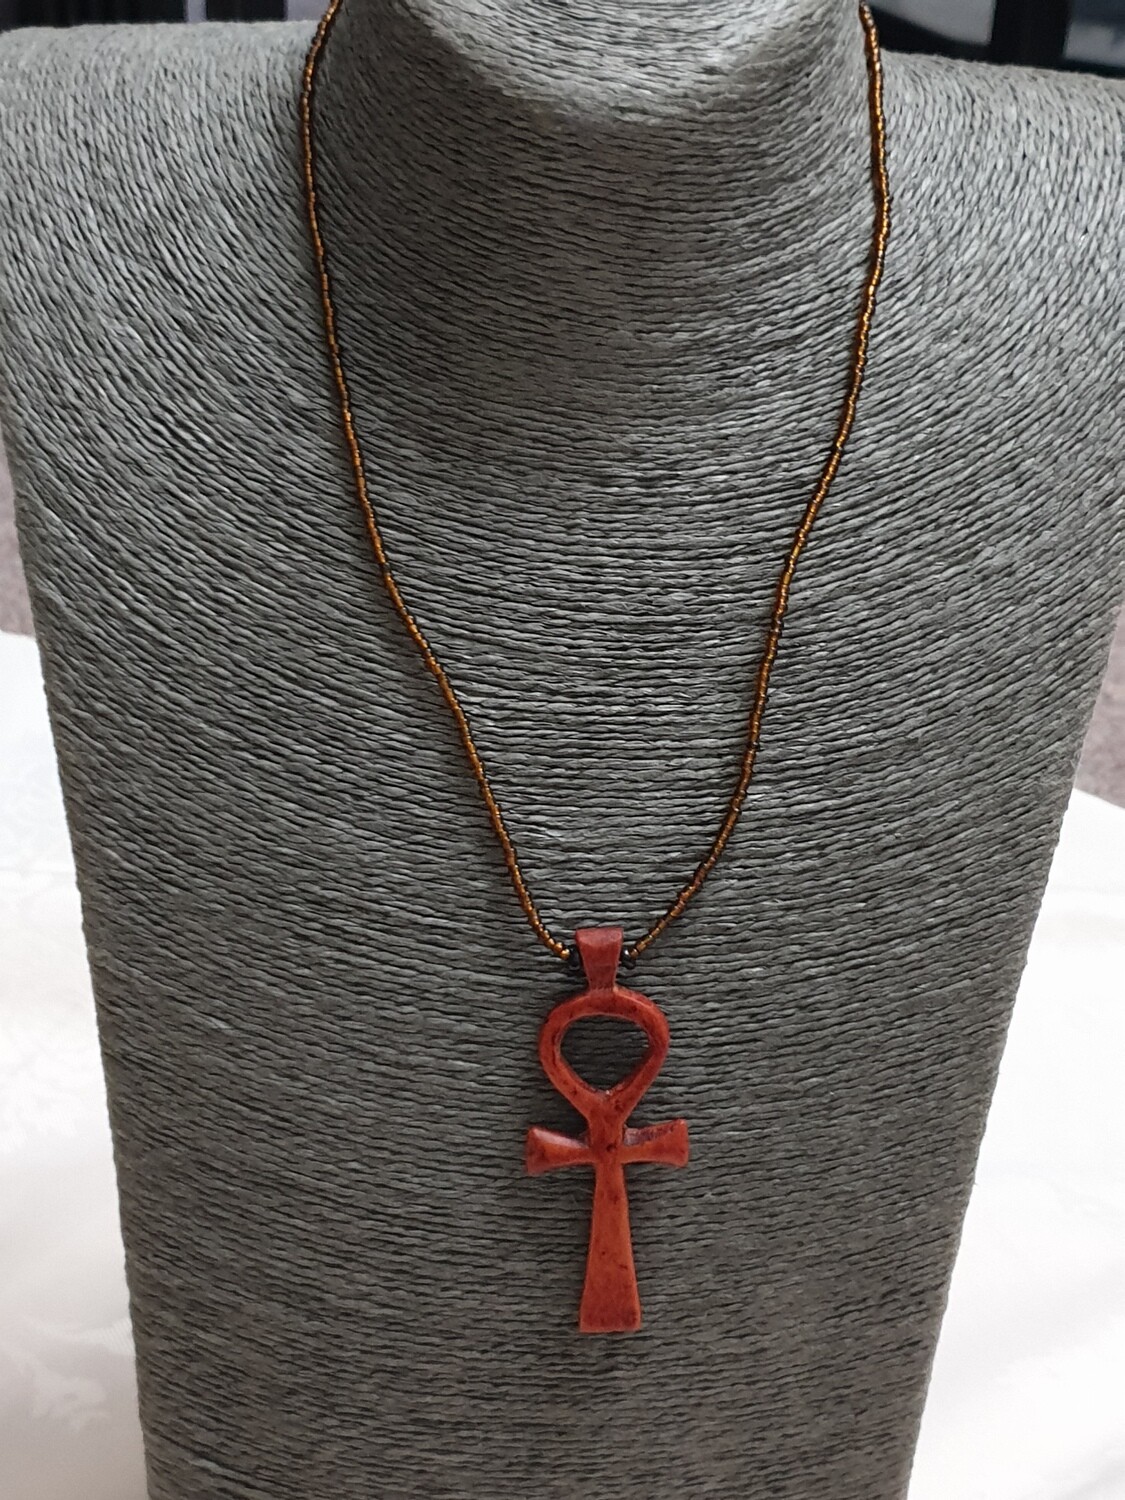 Hand Crafted Rose Wood Ankh Pendant